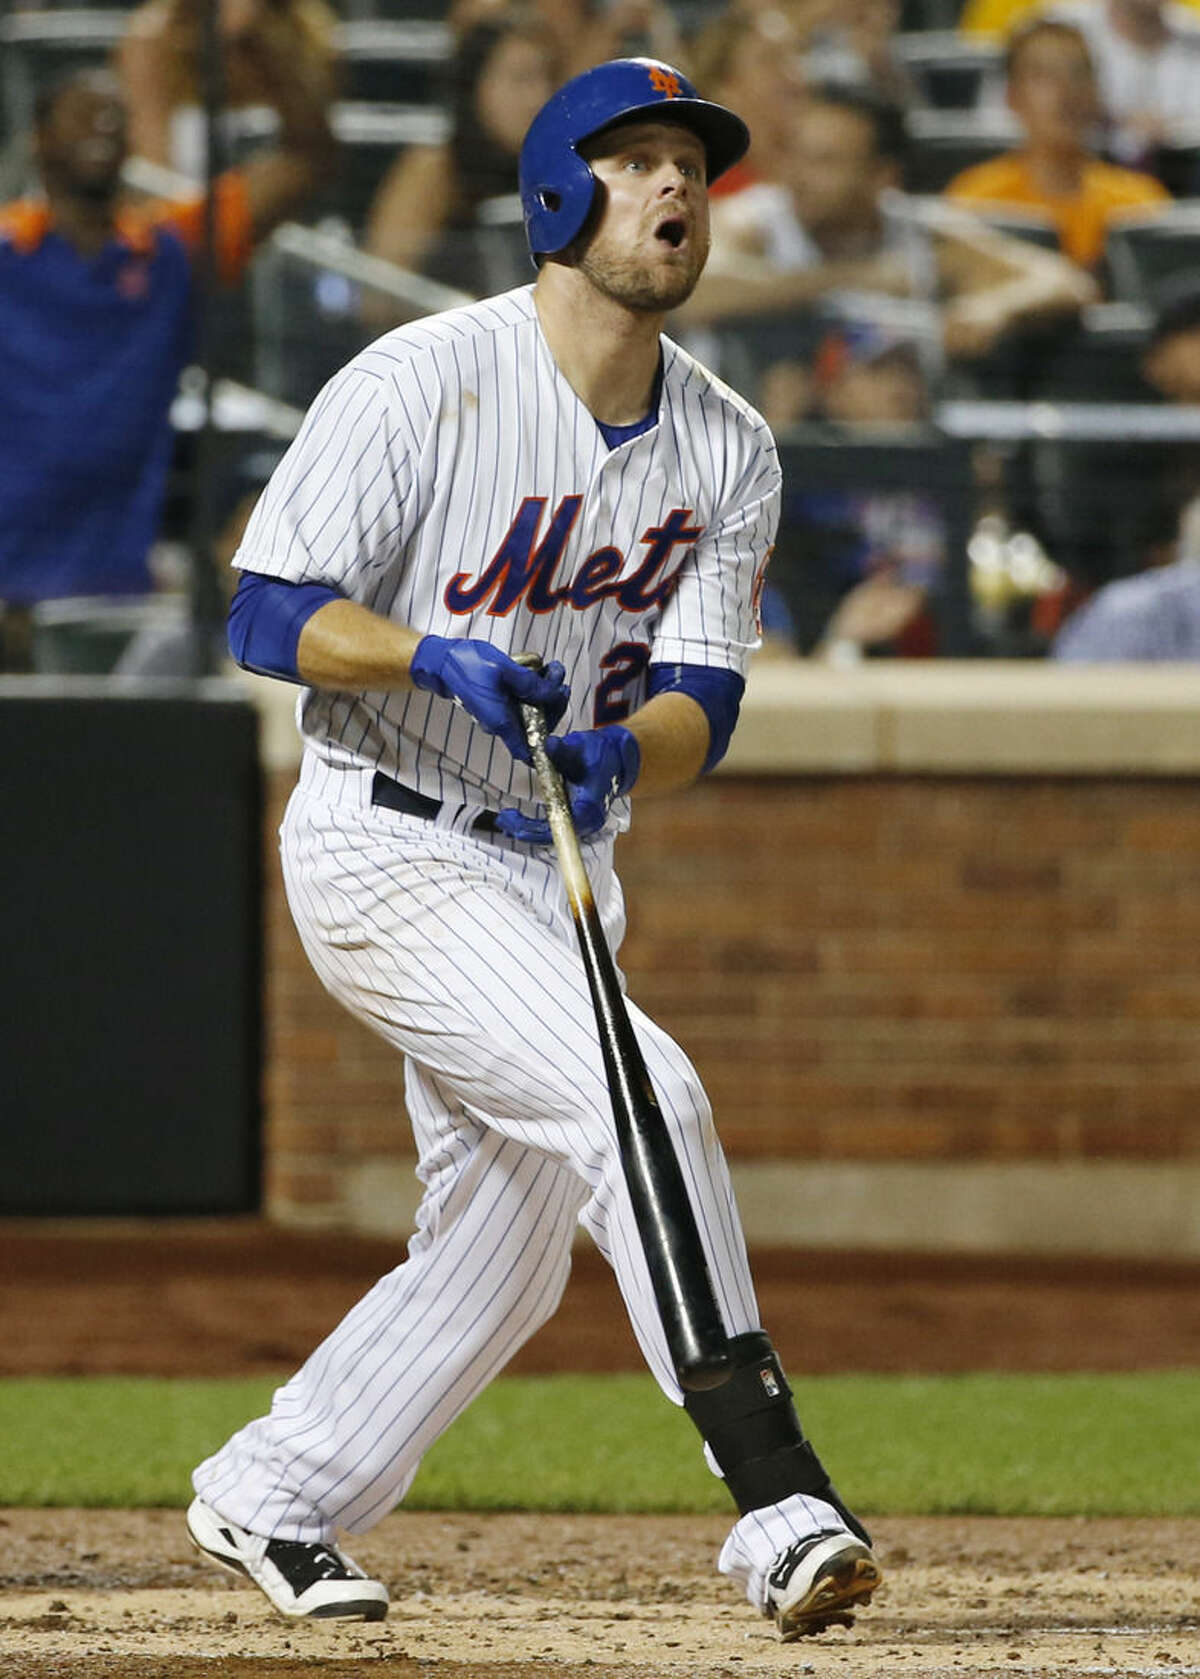 New York Mets Lucas Duda reacts to hitting a third-inning, two-run home run off Washington Nationals starting pitcher Jordan Zimmermann during a baseball game in New York on Sunday, Aug. 2 2015. Zimmerman allowed five runs in the inning, including a second, two-run home run to the Mets' Curtis Granderson. (AP Photo/Kathy Willens)